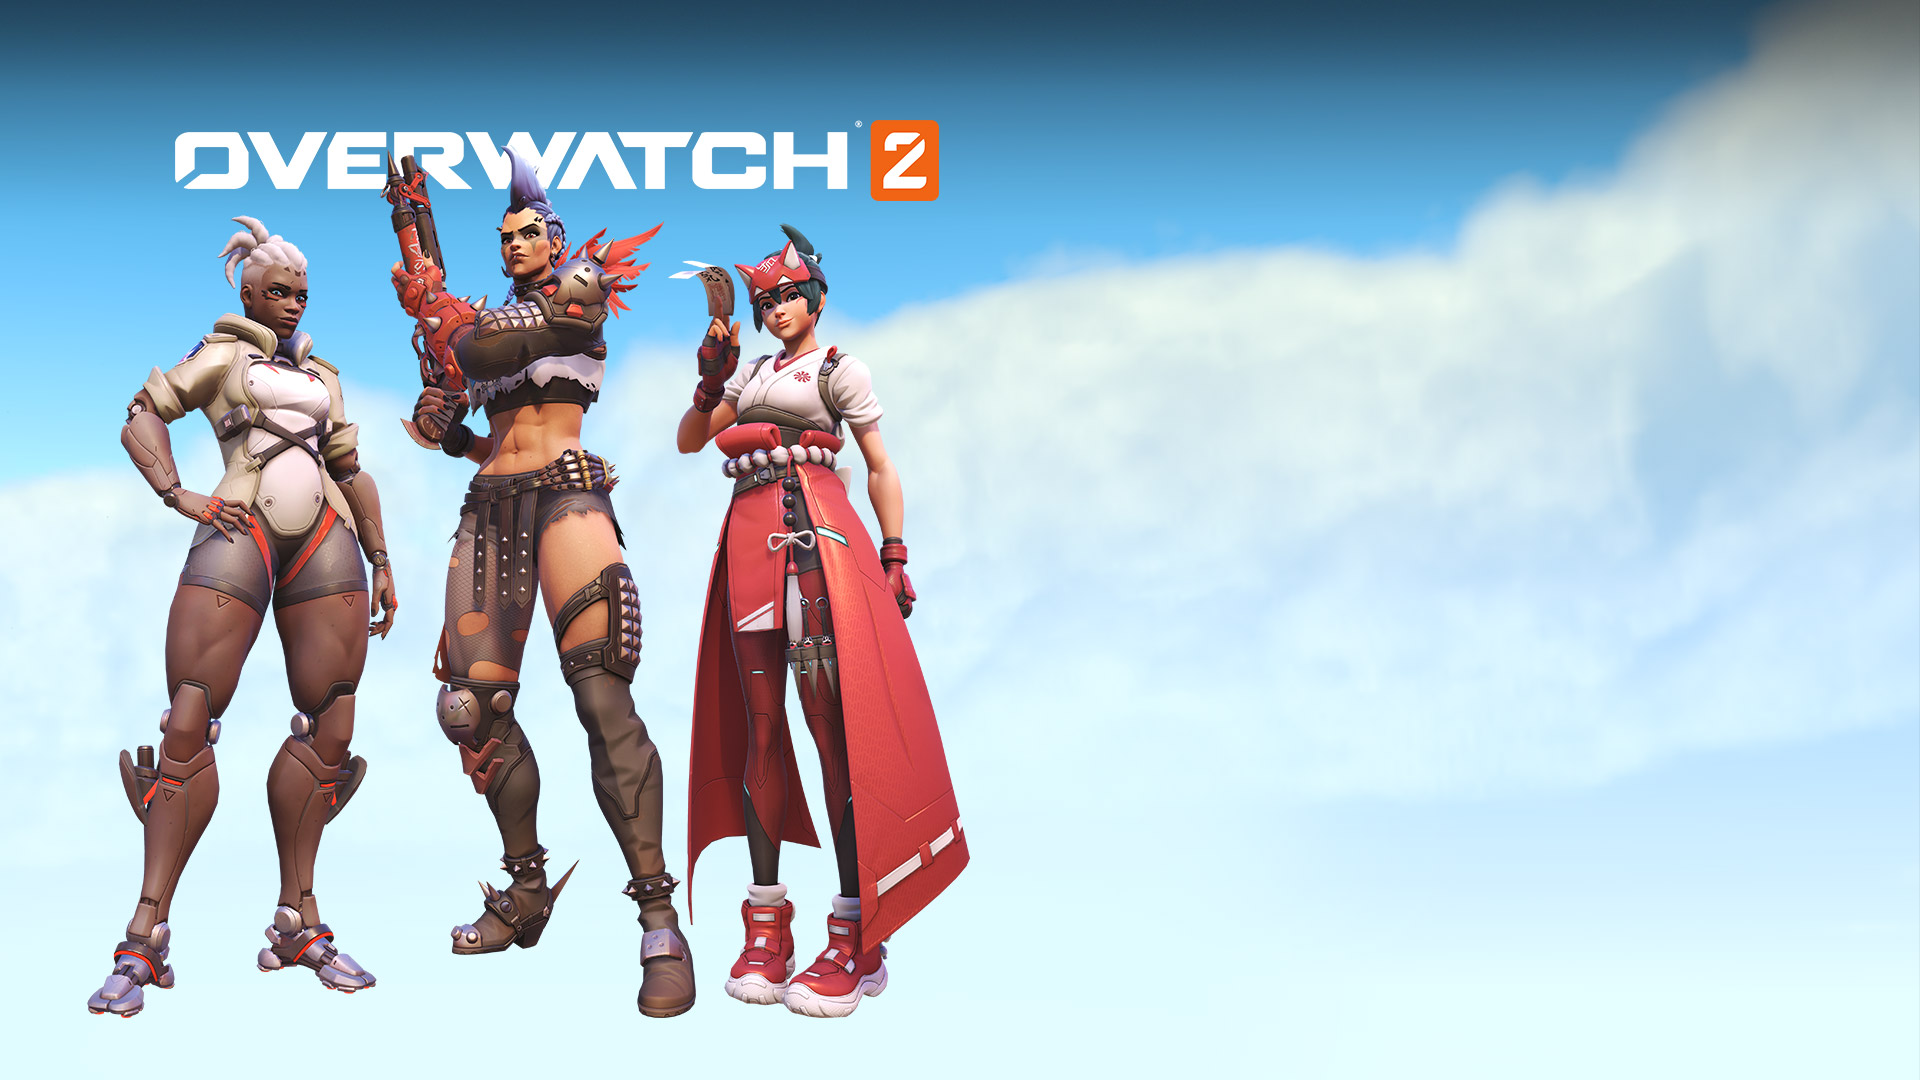 Overwatch 2, Sojourn, Junker Queen, and Kiriko pose confidently among the clouds.